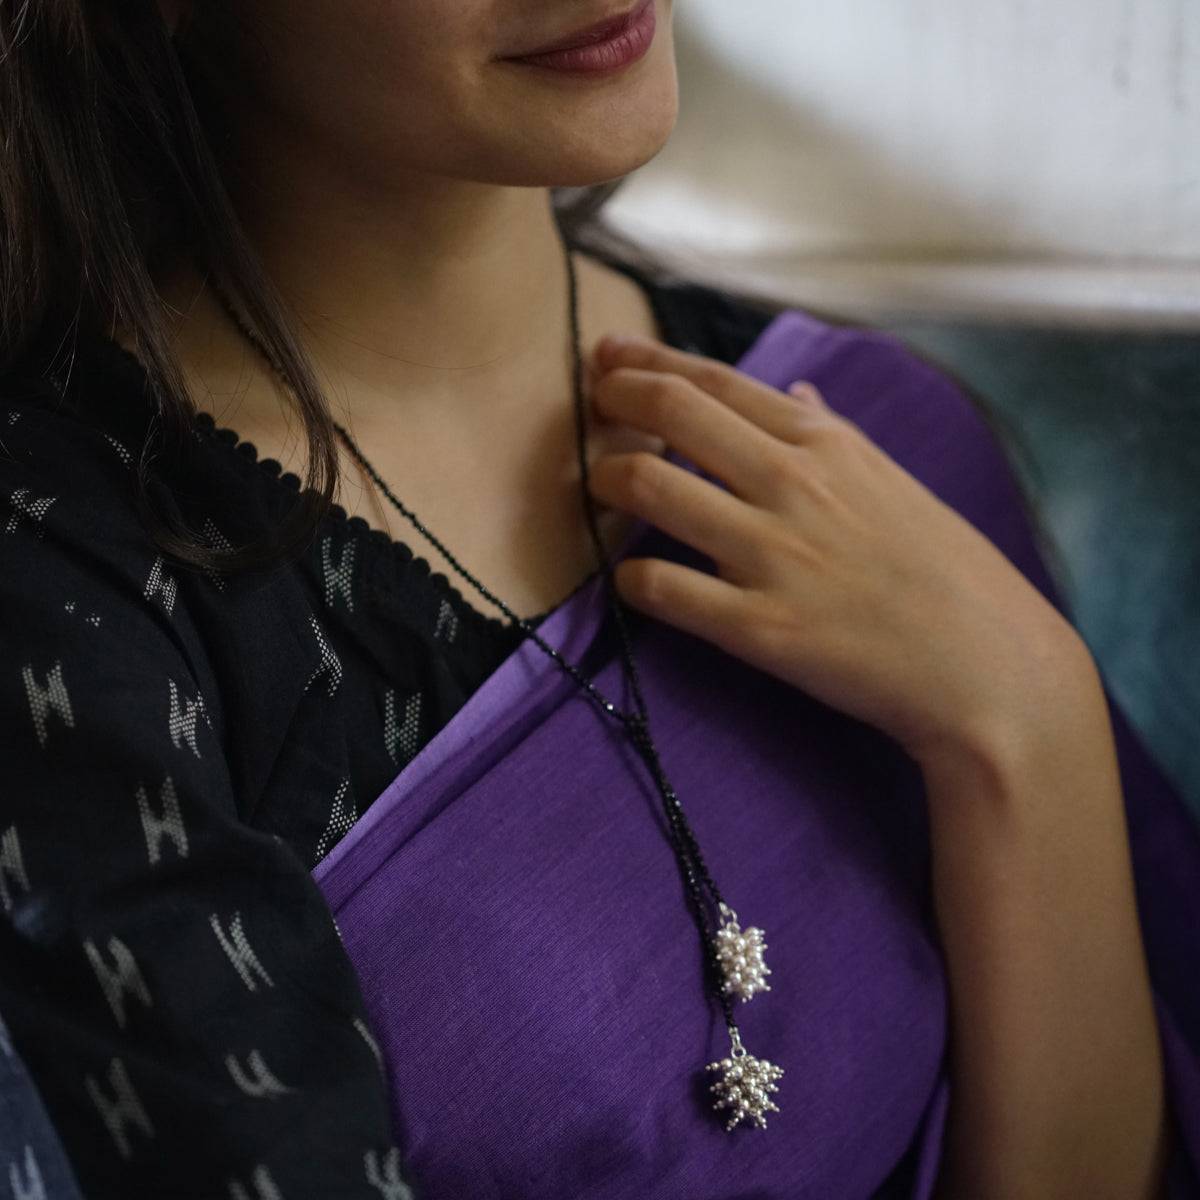 Yin Yang: Tie and Wear Mangalsutra with Silver Beads, Pearls and Black Spinel